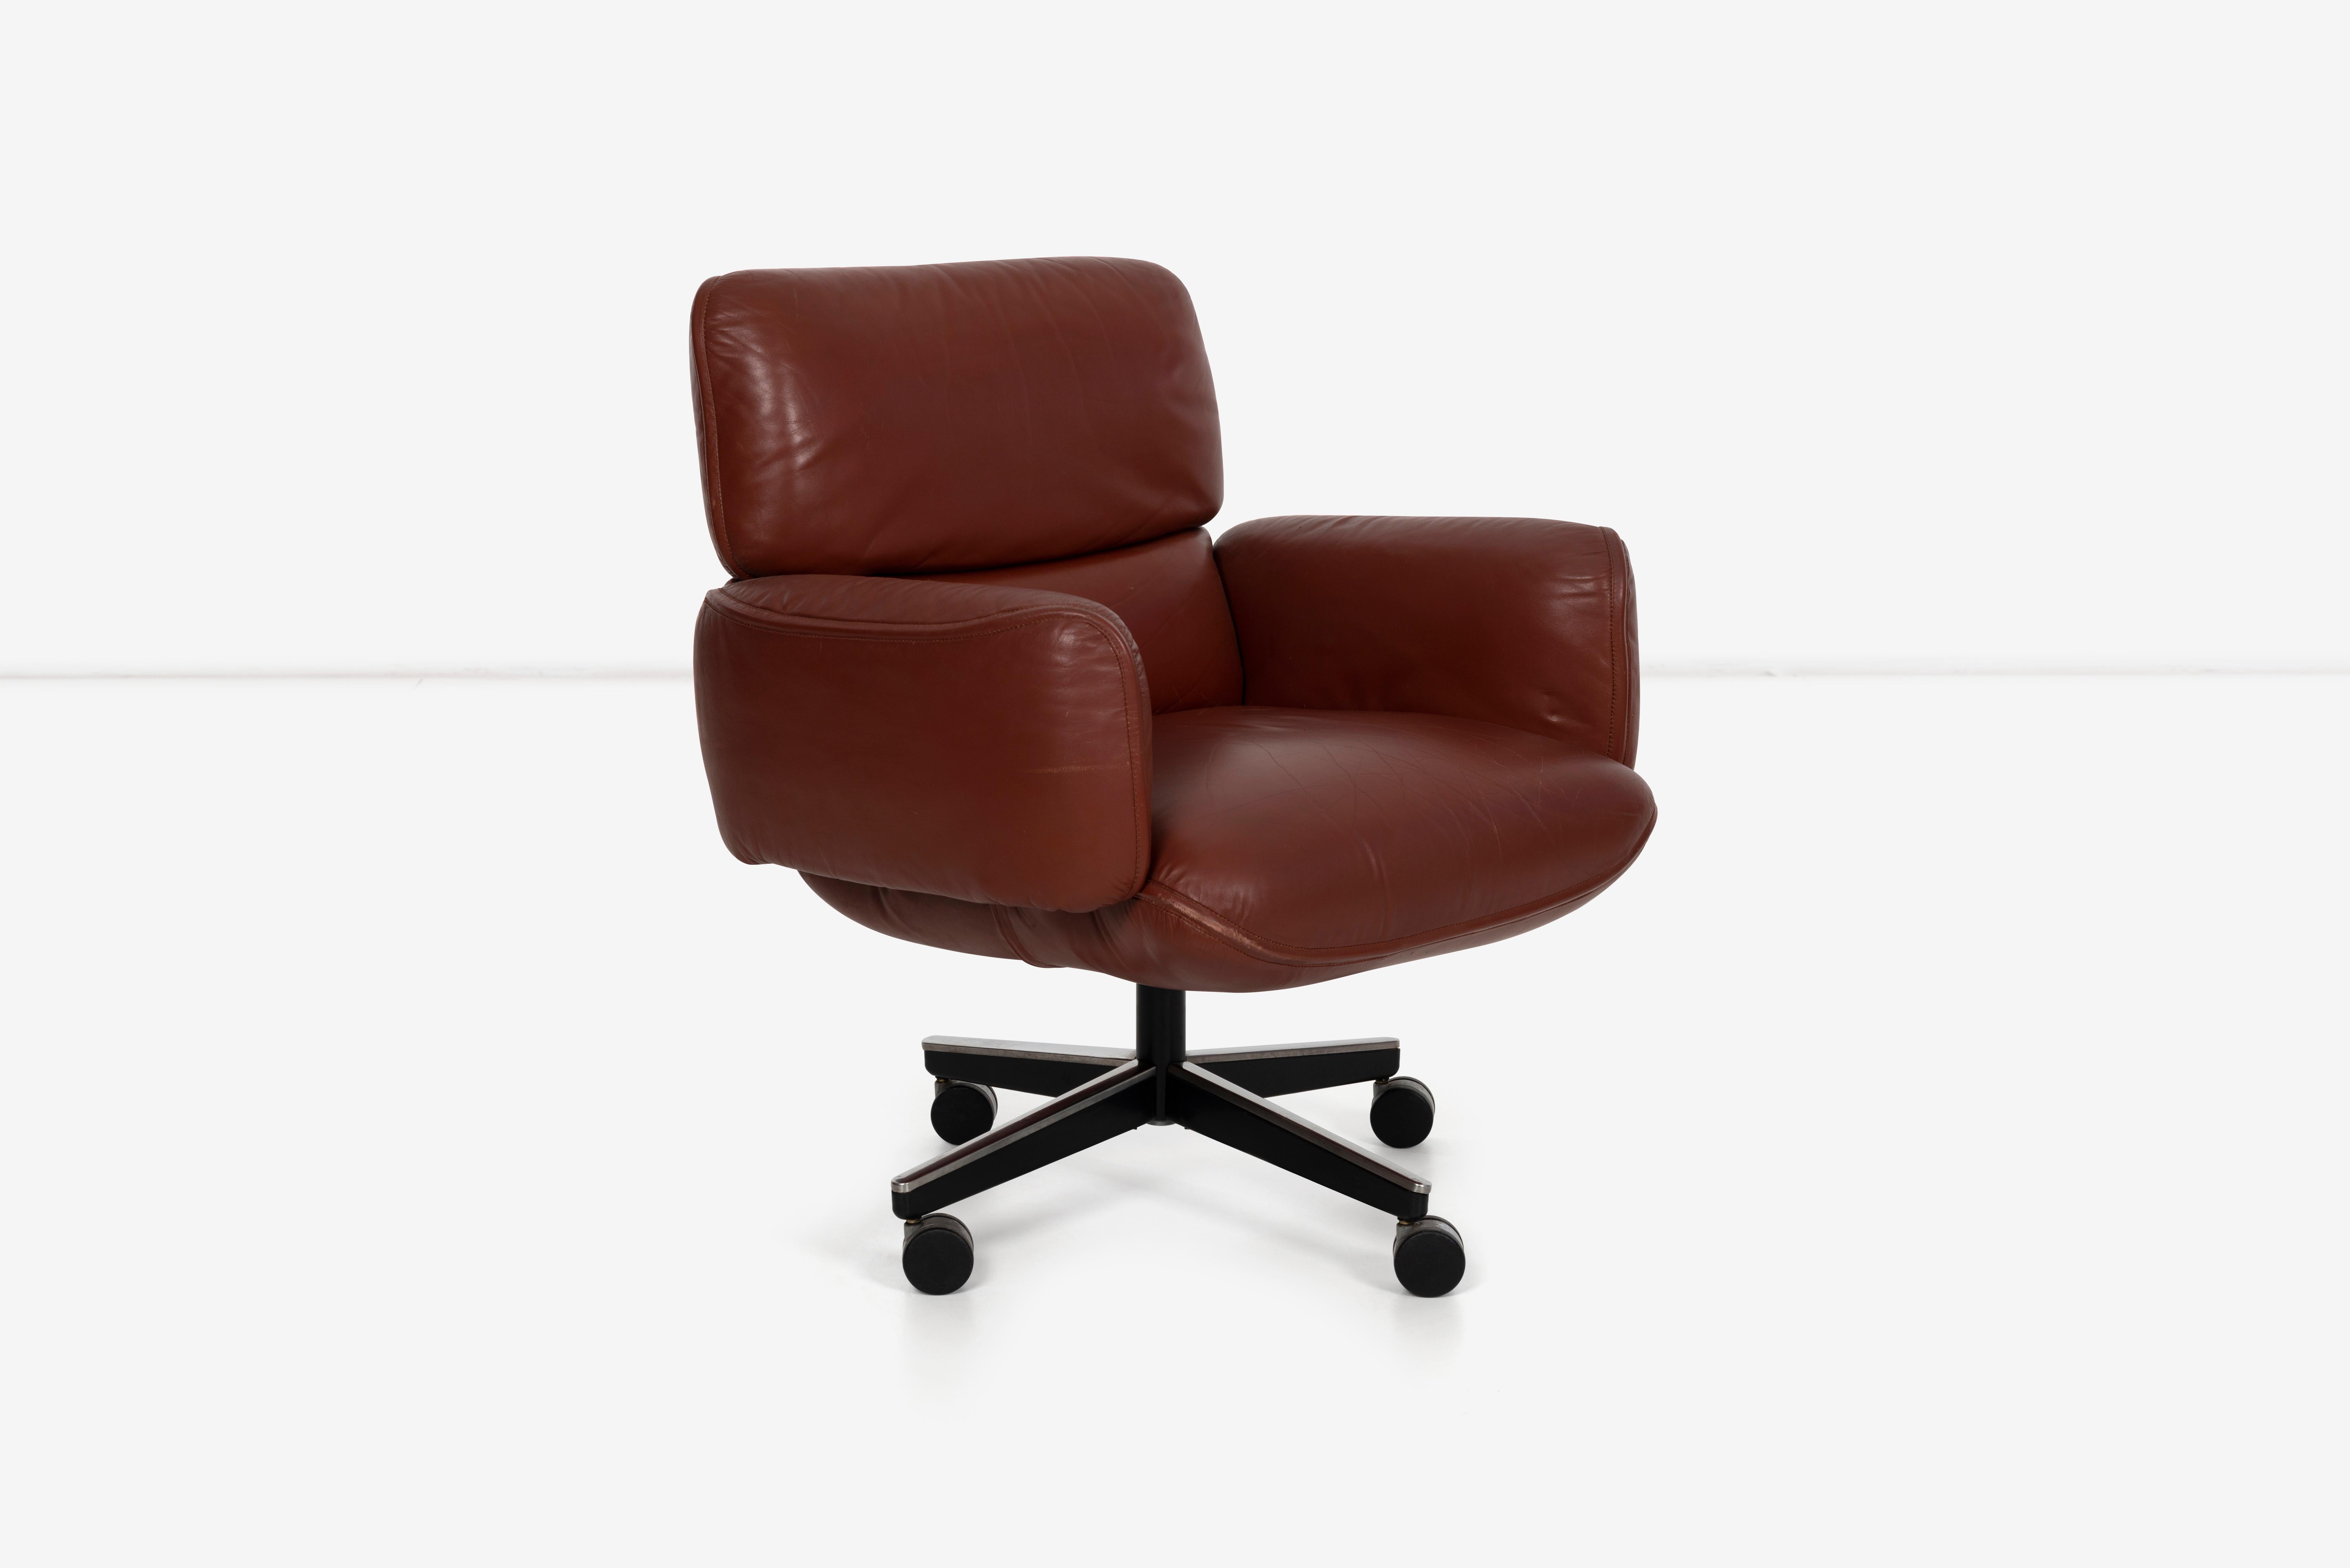 Otto Zapf executive chair, low-back lounge, tilt swivel adjustable seat height on wheels.
Signed on underside label pictured.
   